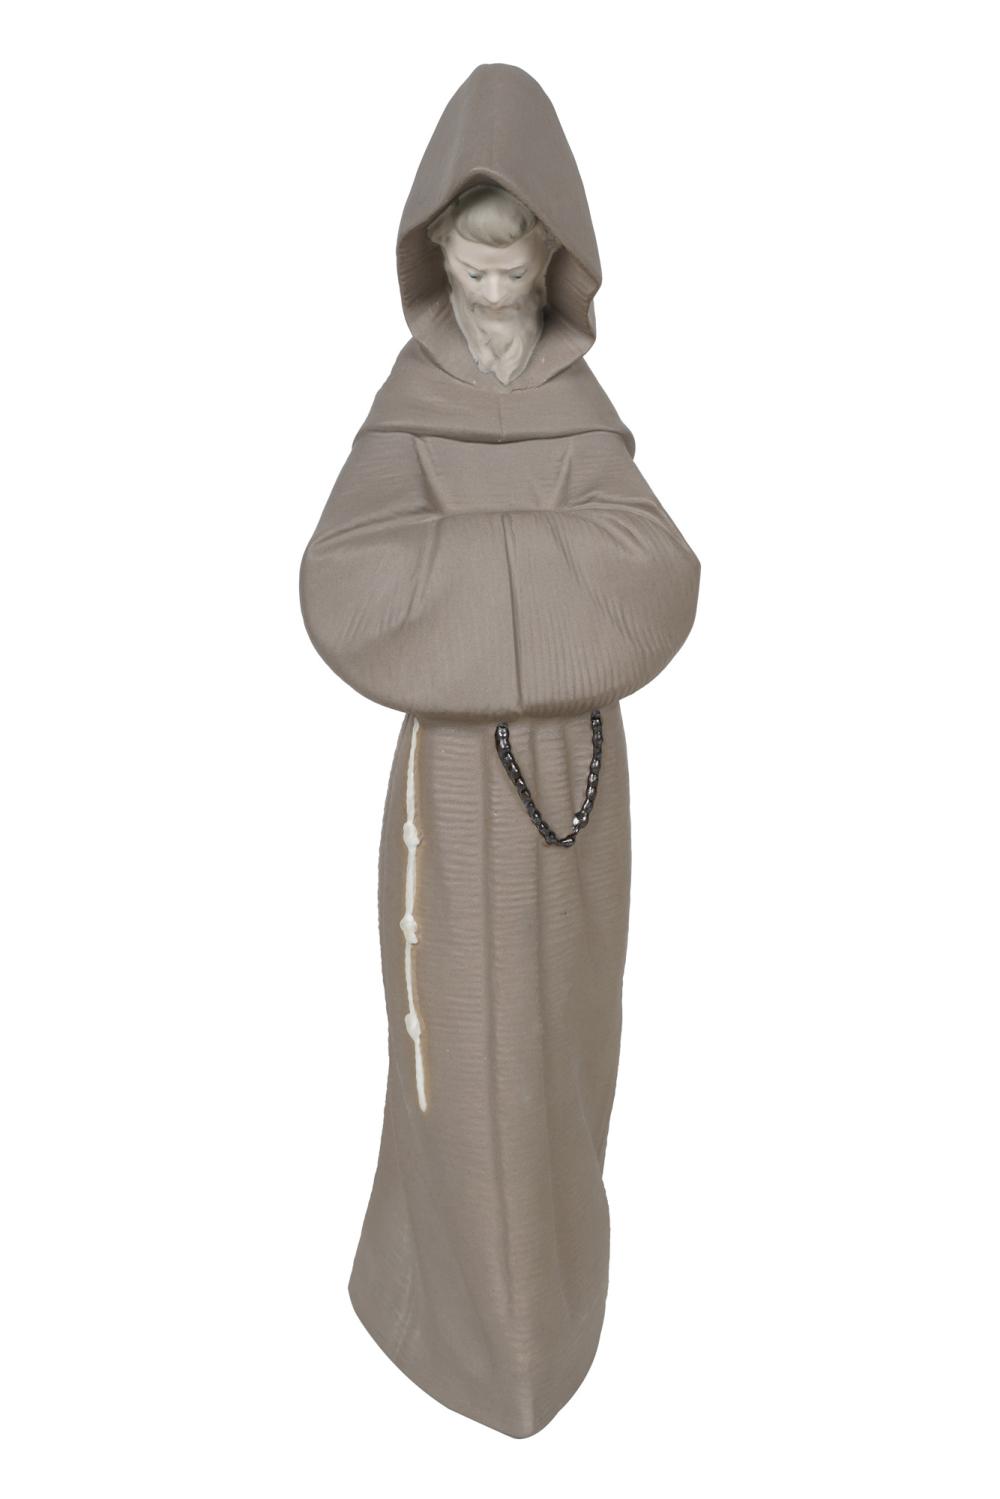 LLADRO FIGURE OF A SAINT13 1/2 inches